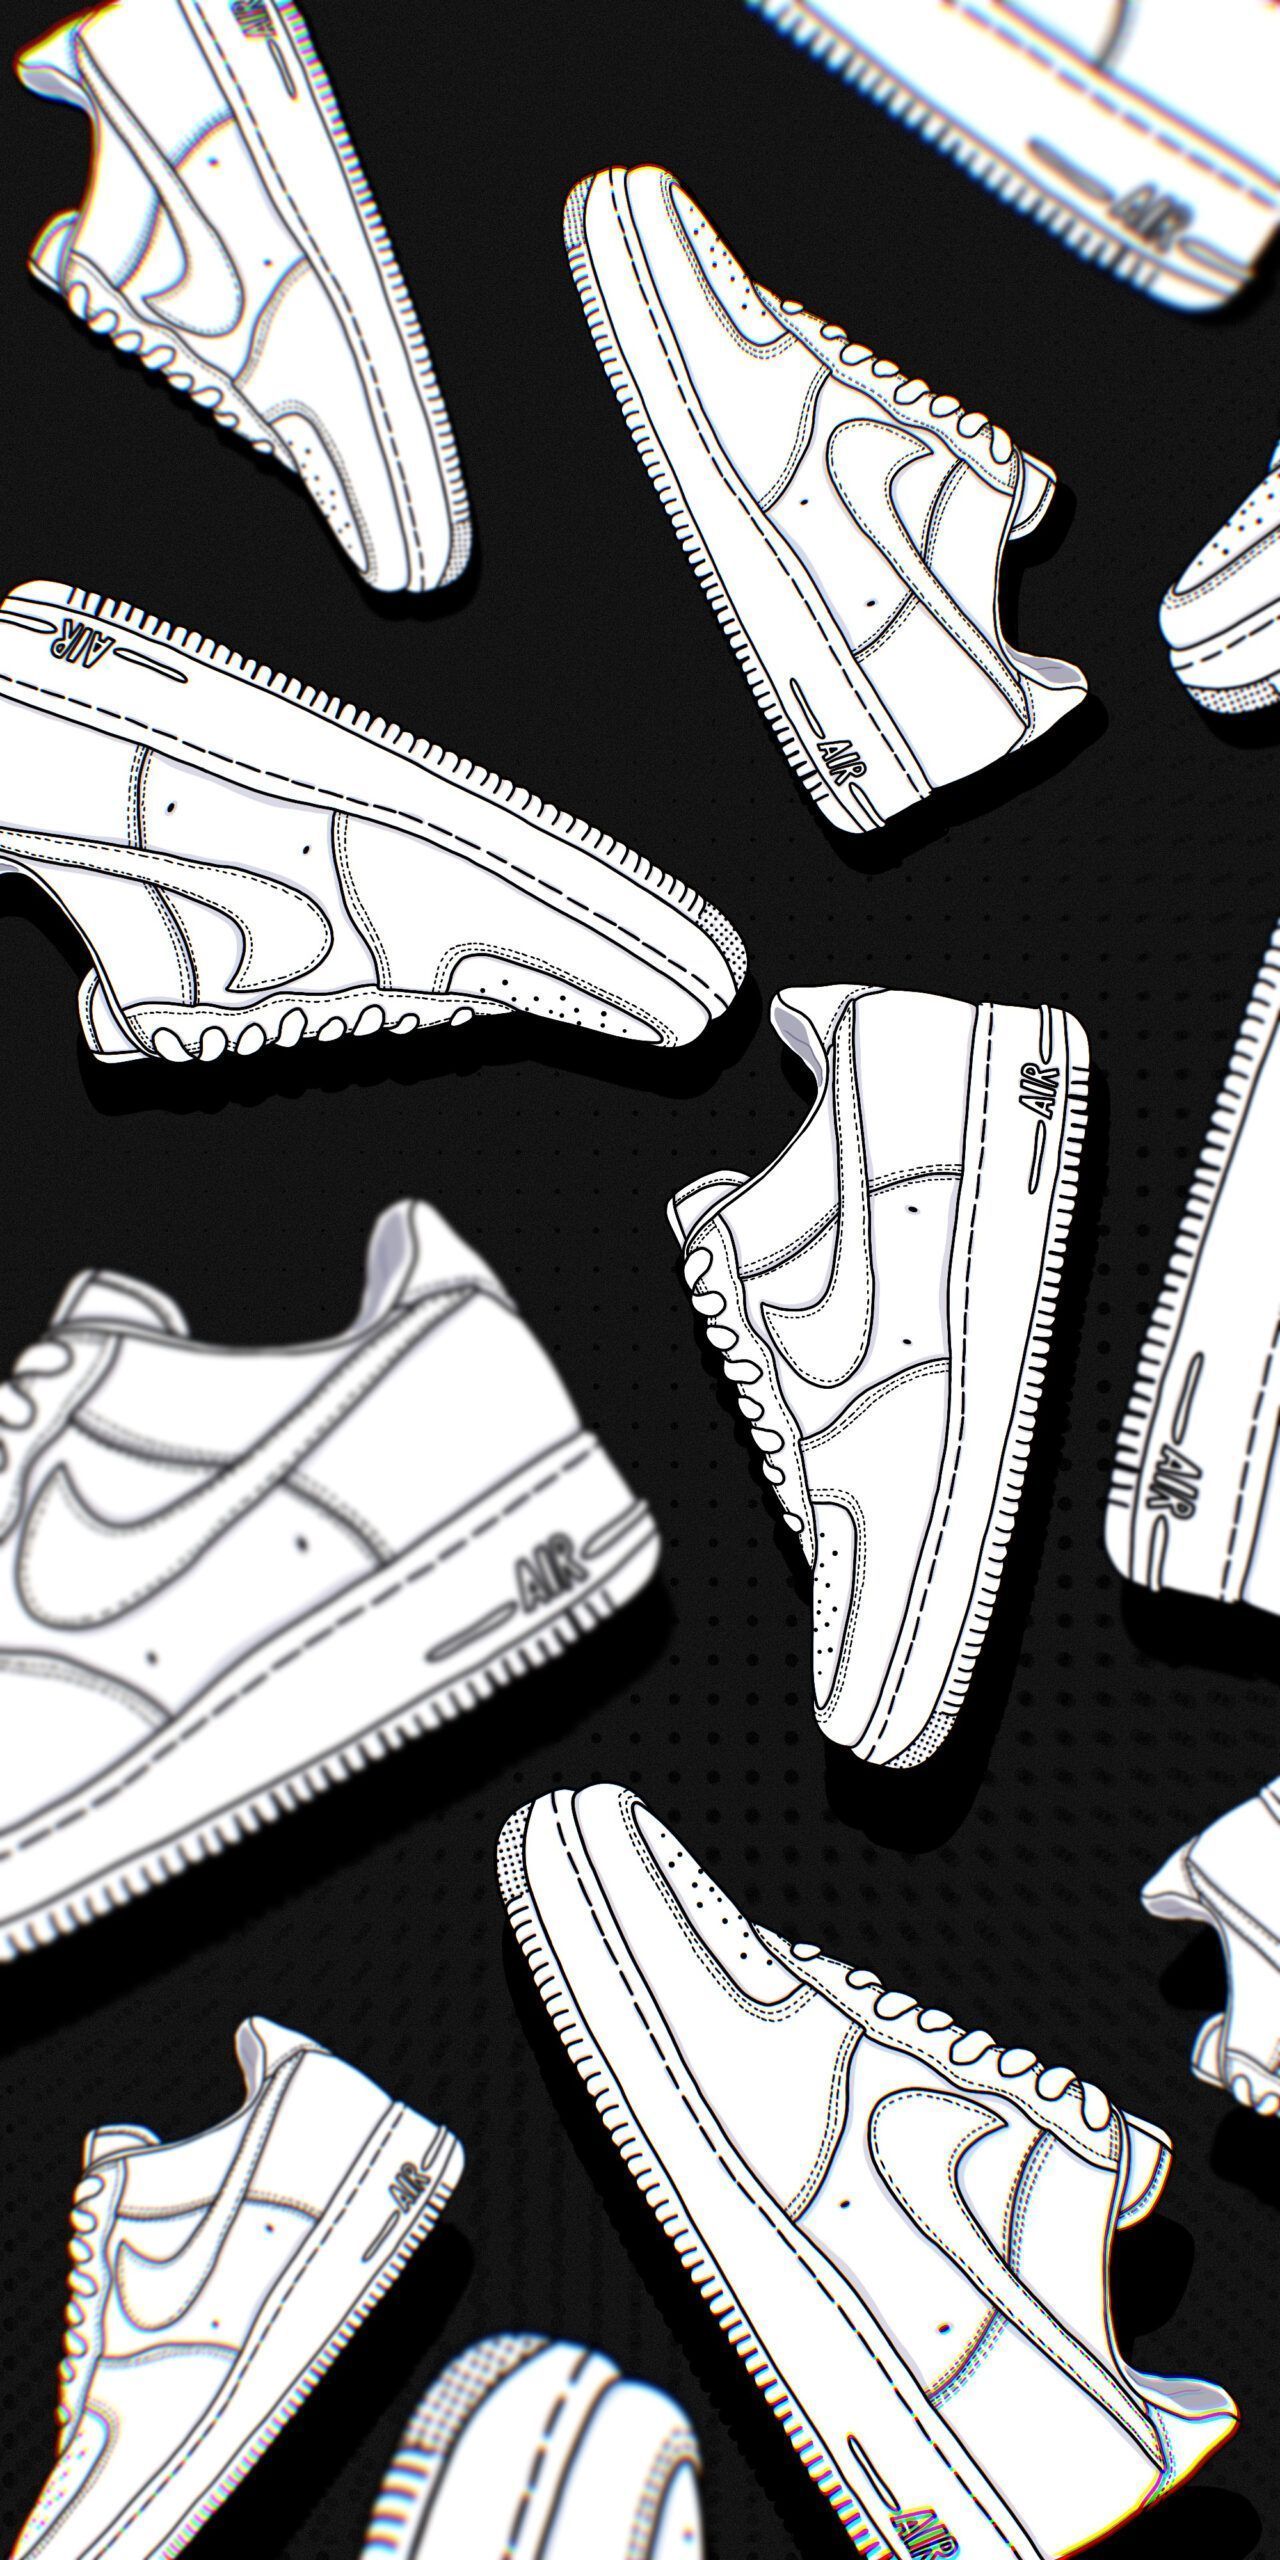 Nike Air Force 1 wallpaper for iPhone and Android - Shoes, Nike